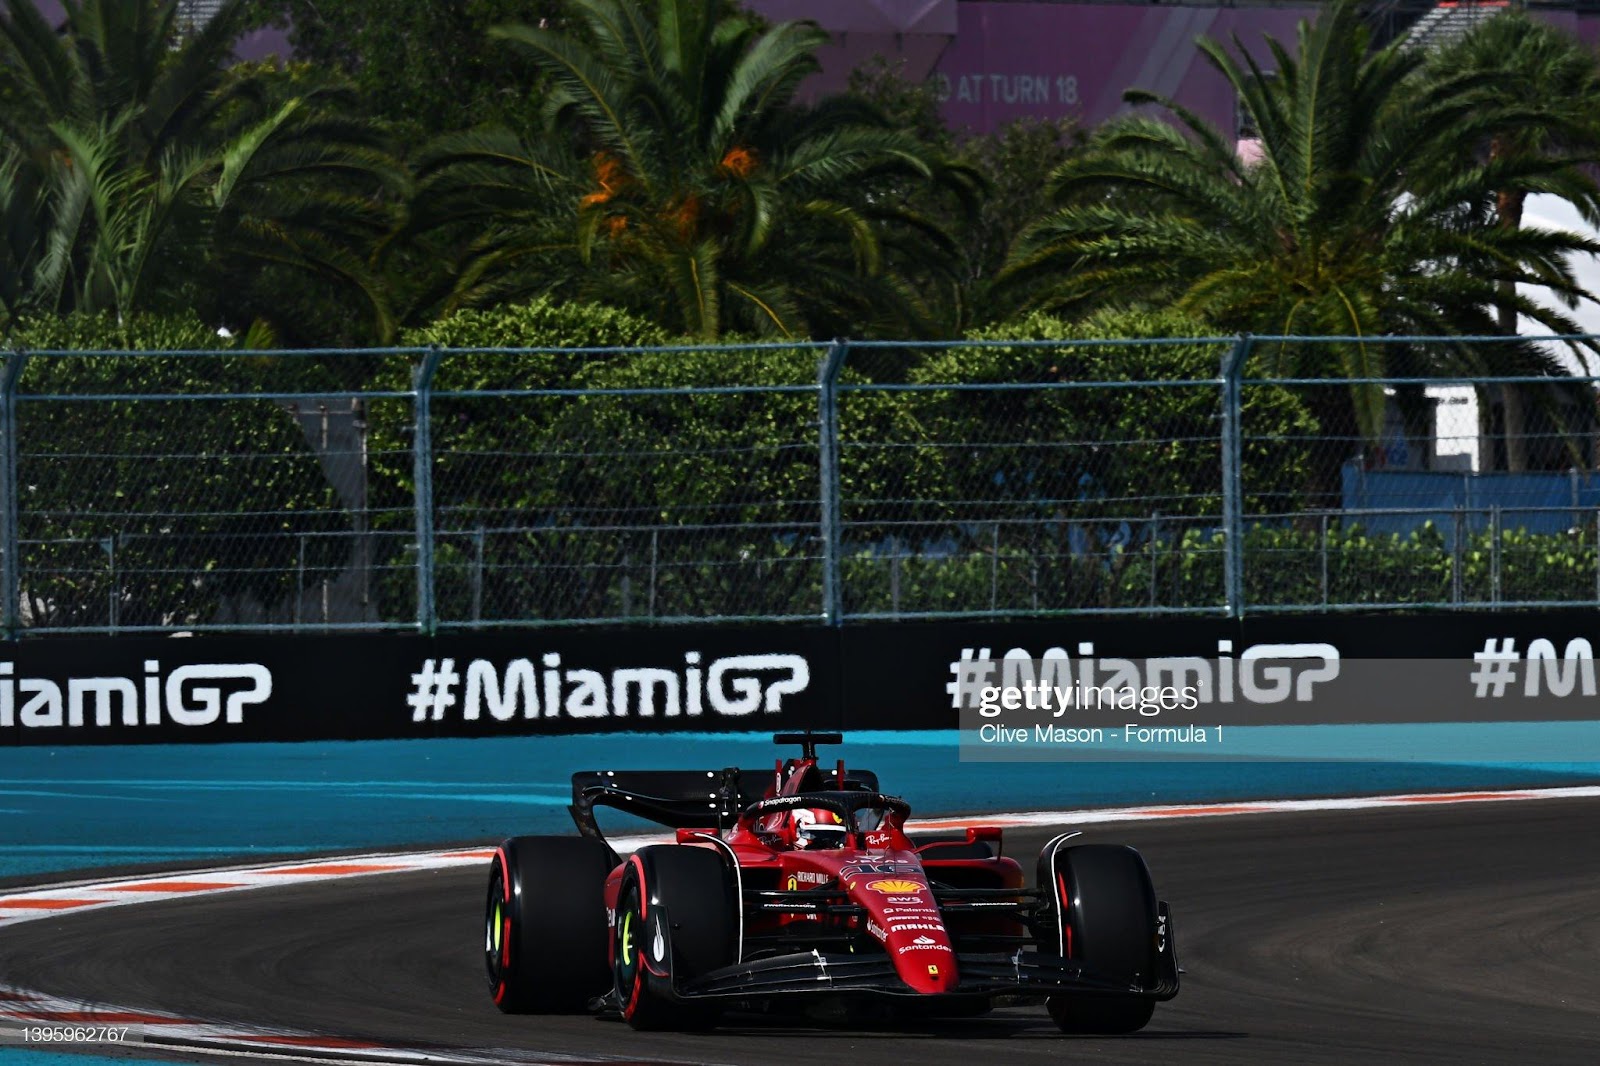 D:\Documenti\posts\posts\Miami\New folder\circuit\charles-leclerc-of-monaco-driving-the-ferrari-f175-on-track-during-picture-id1395962767.jpg